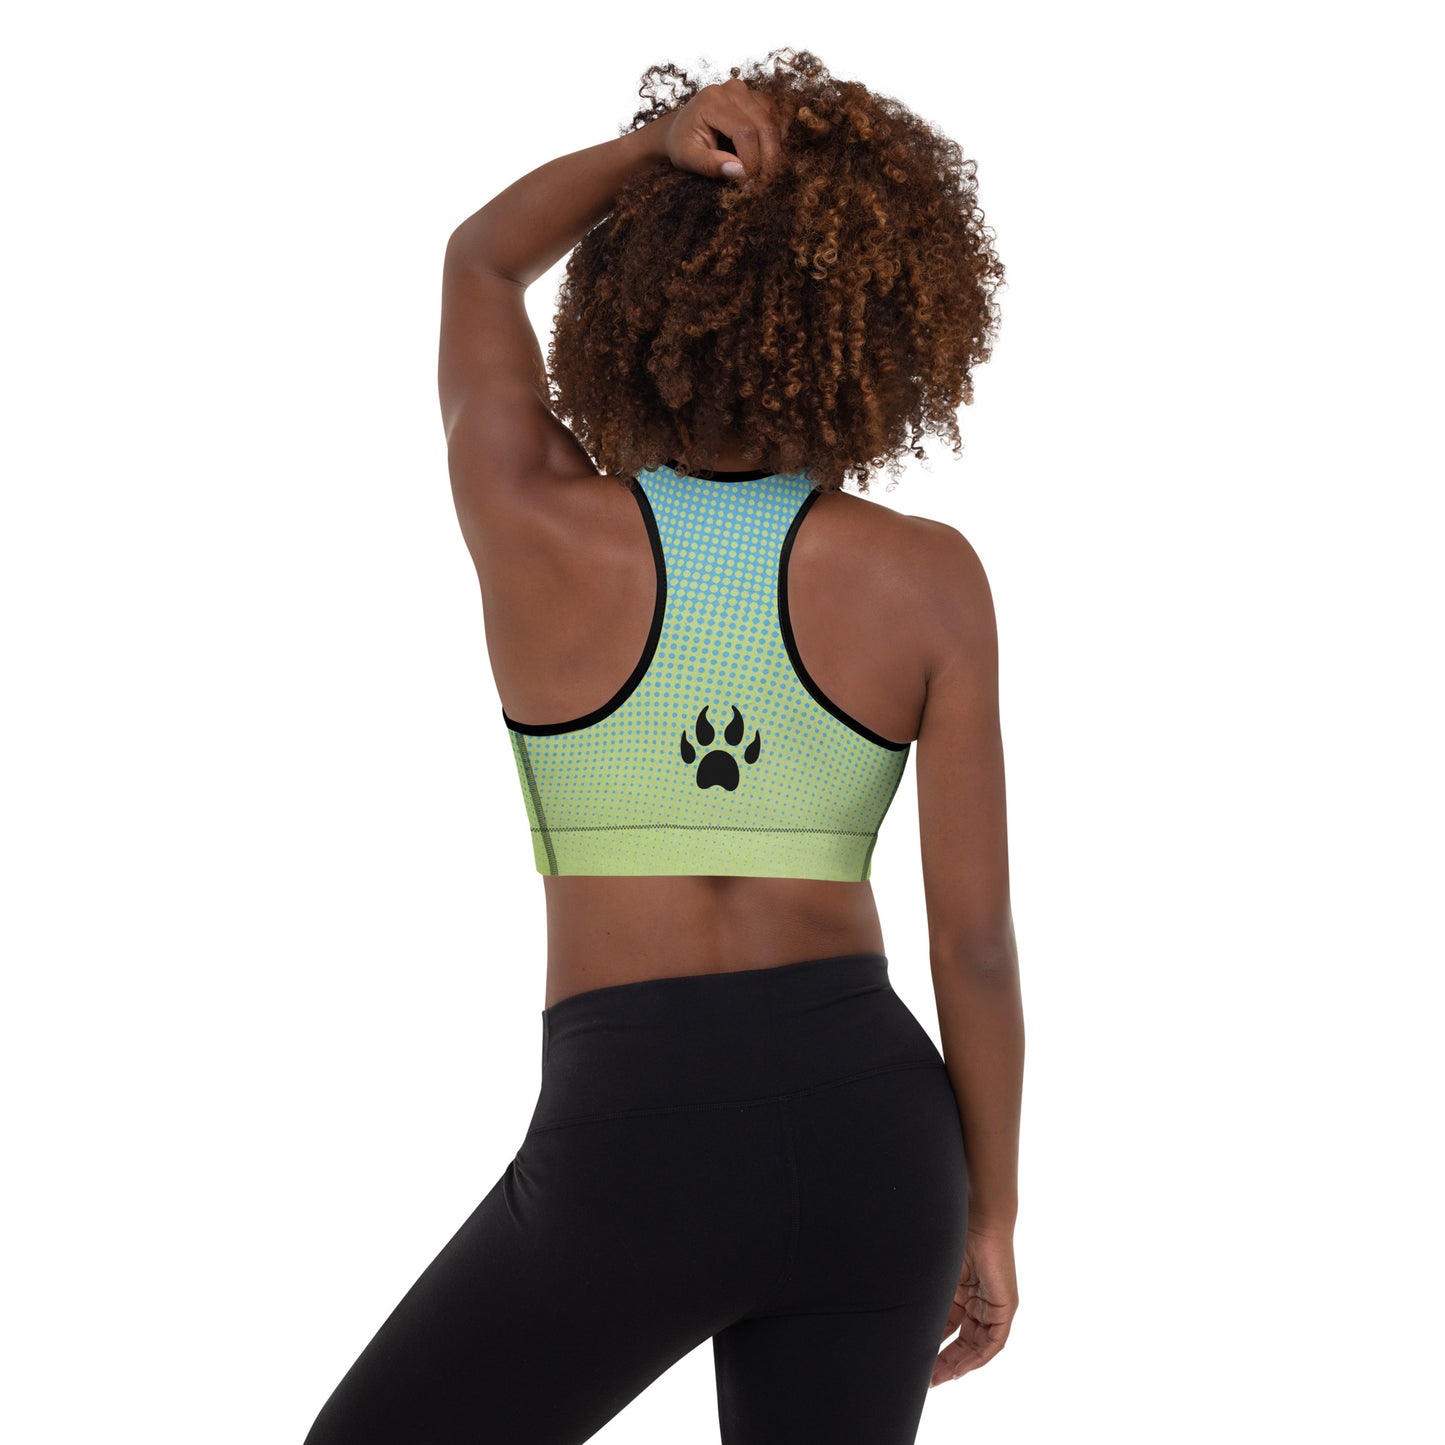 The back view of a woman wearing a Sweetest Paw Padded Sports Bra Multi in green and blue.